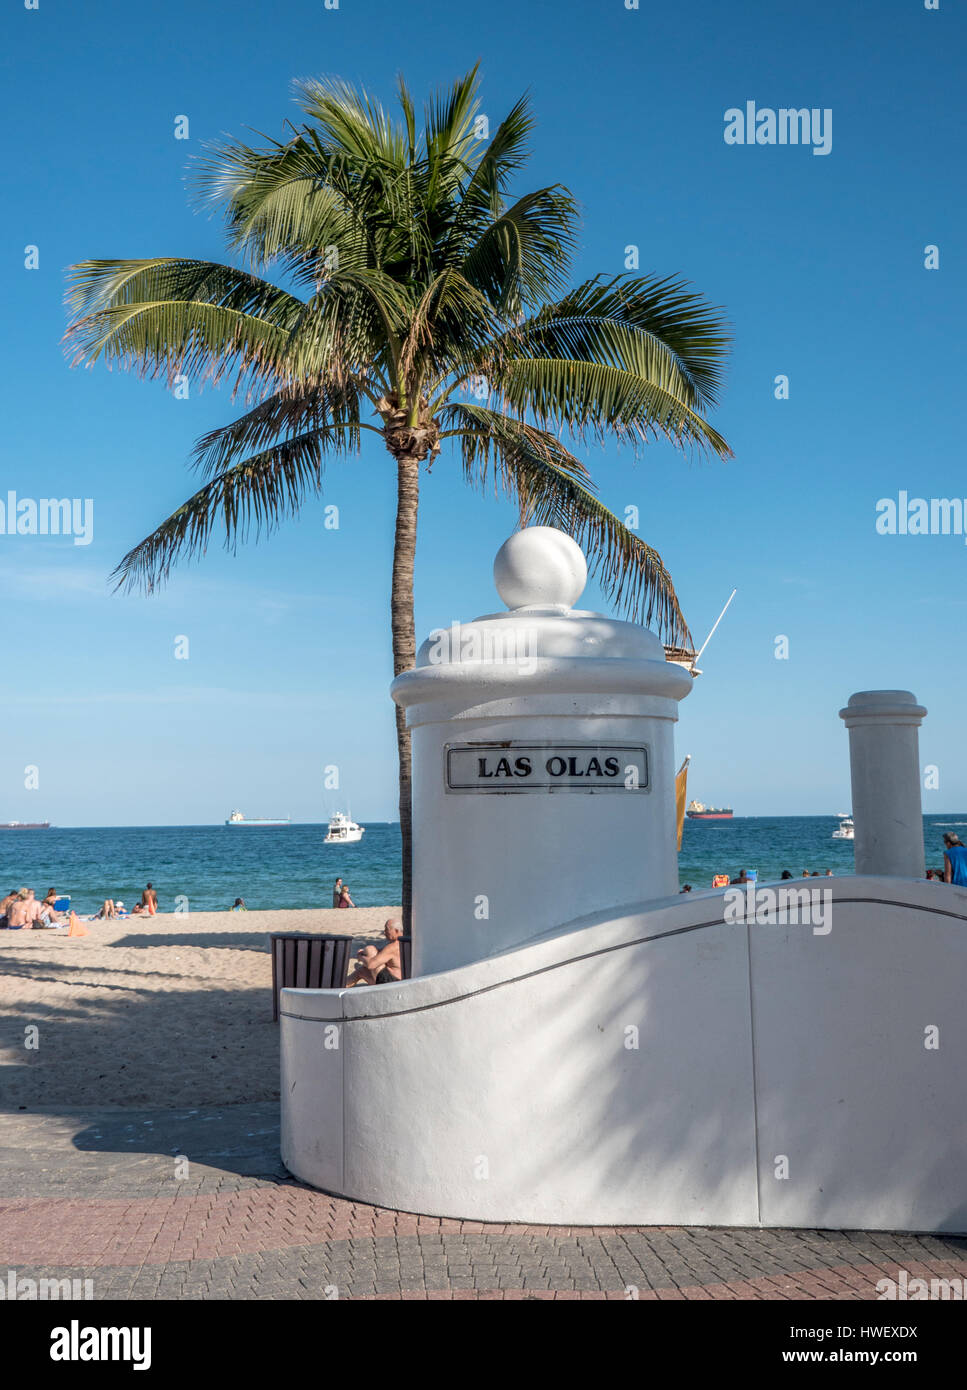 The Las Las Beach Sign And Entrance In Fort Lauderdale, Florida, A Very Popular Beach And Shopping Area Stock Photo